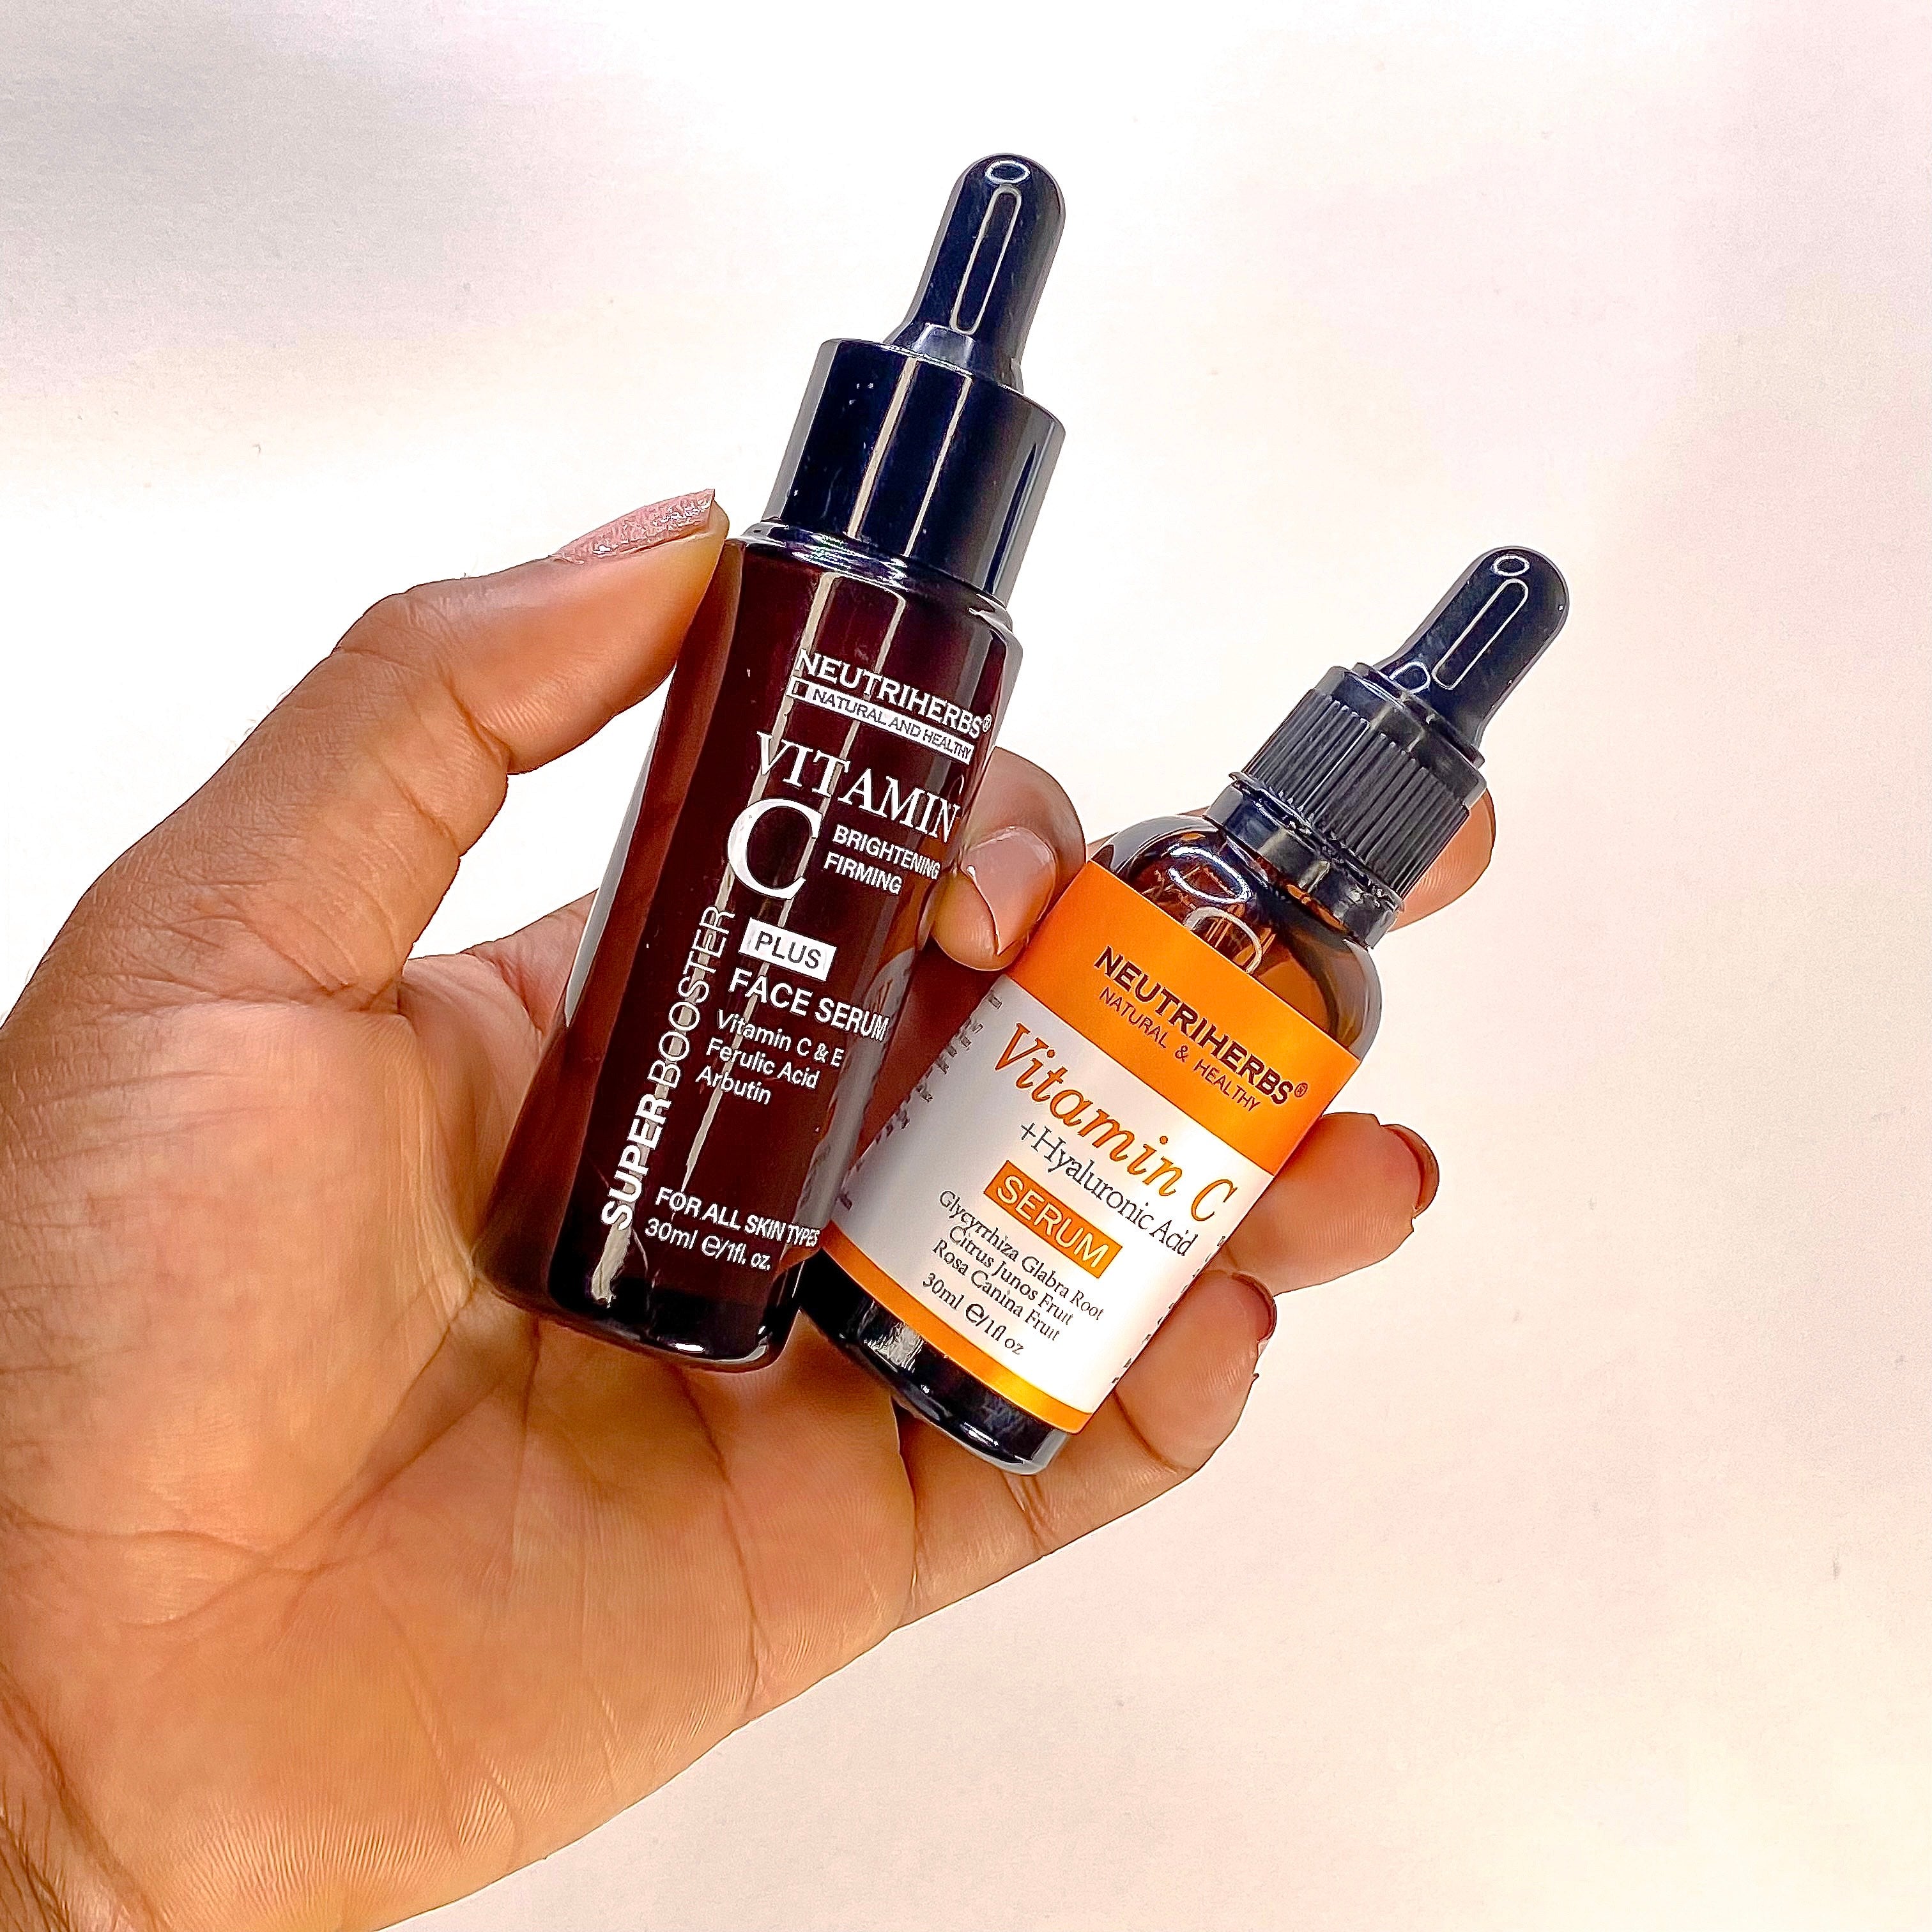 Which is The Best Neutriherbs Vitamin C Serum For You?